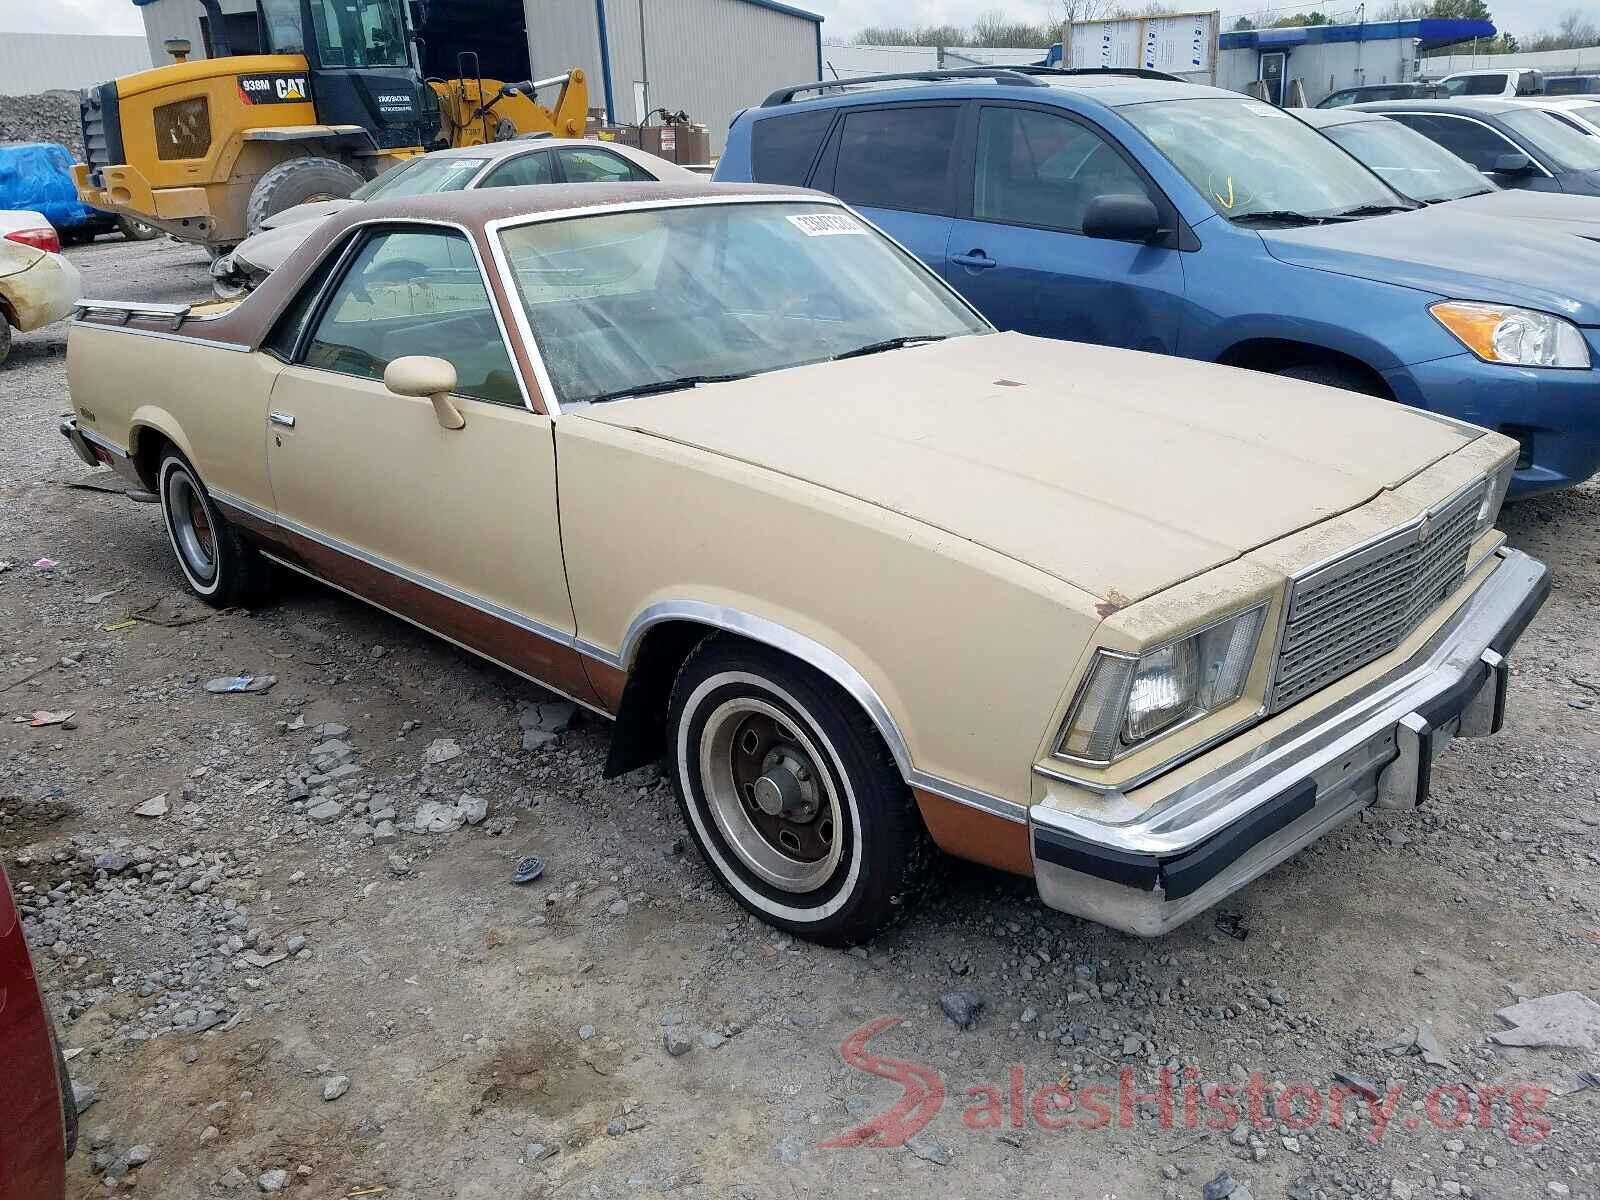 1W80H9D502770 1979 CHEVROLET ALL OTHER